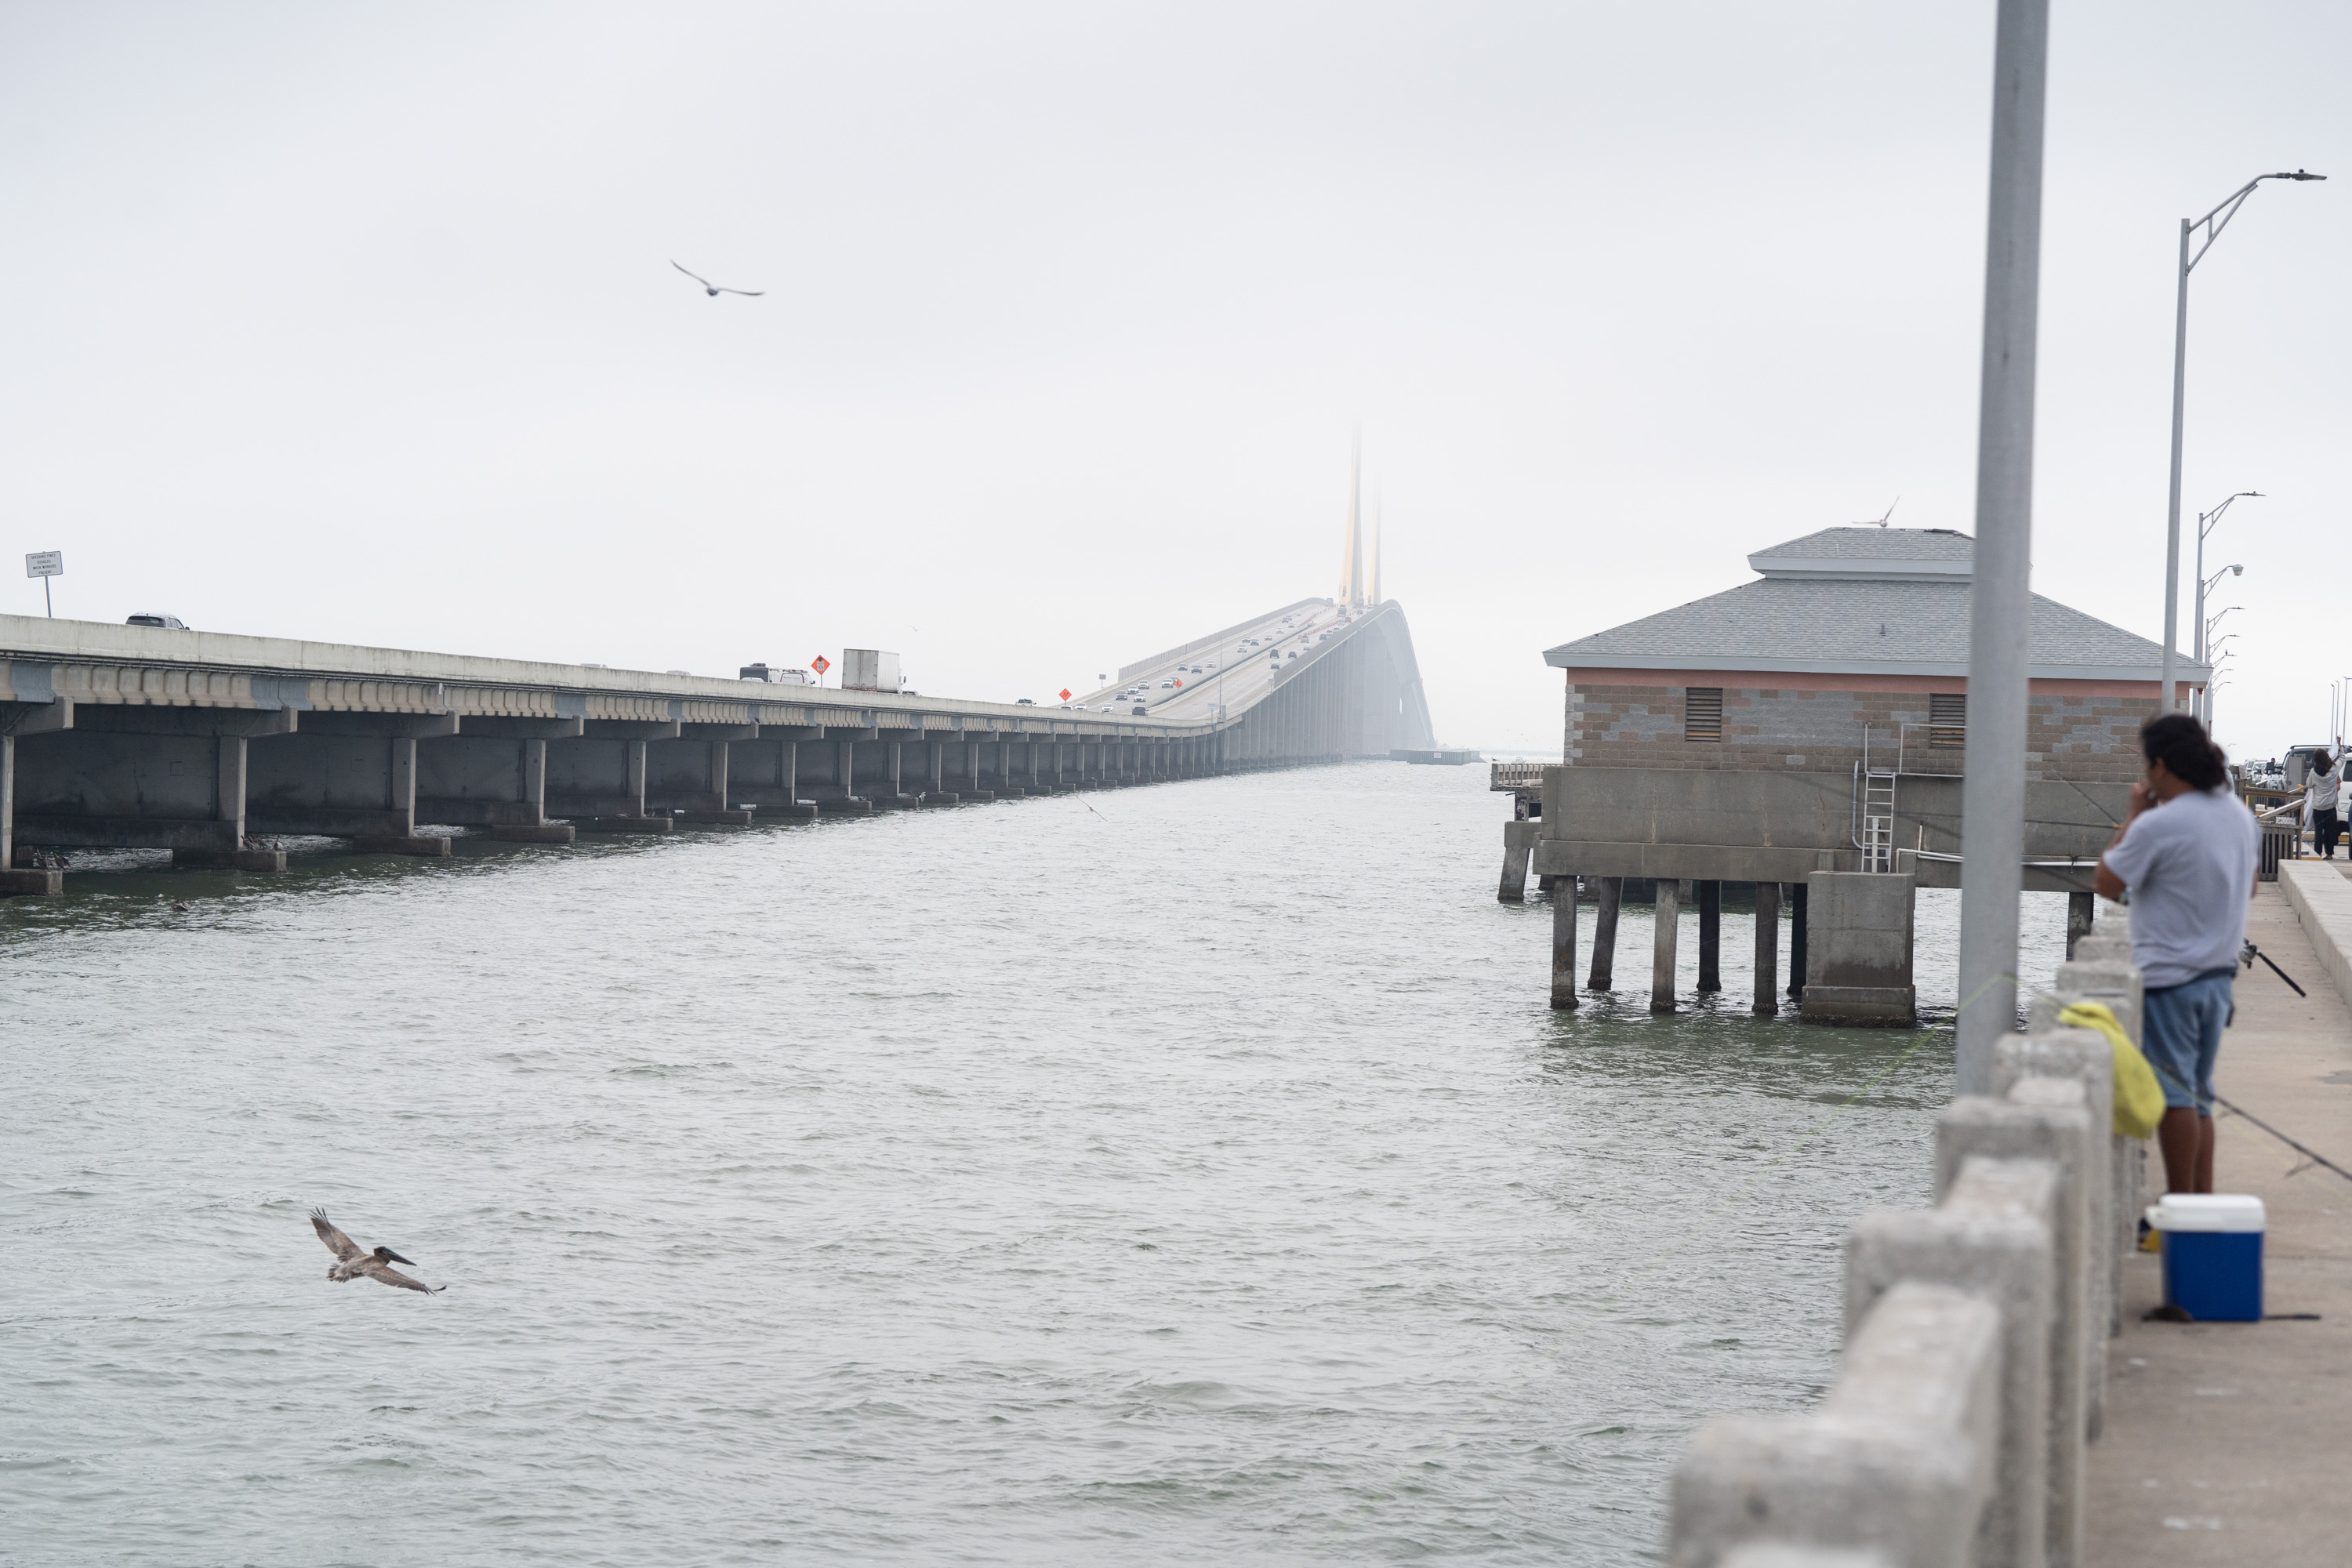 Wildlife officials propose new rules for anglers at Skyway pier to